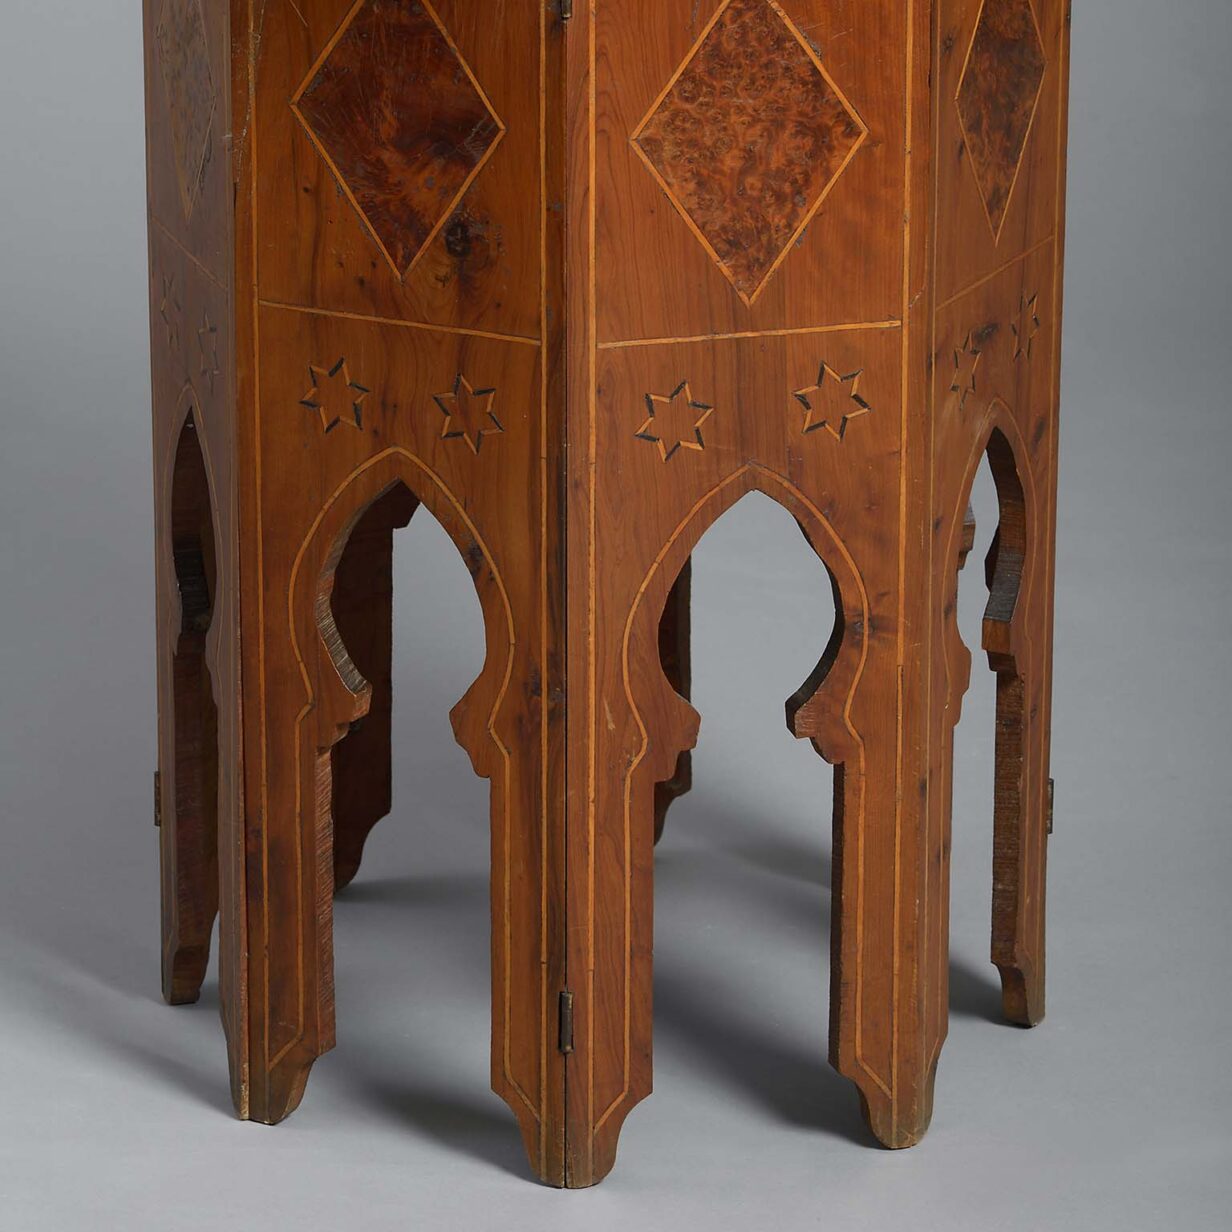 Late 19th century octagonal yew wood sorrento table